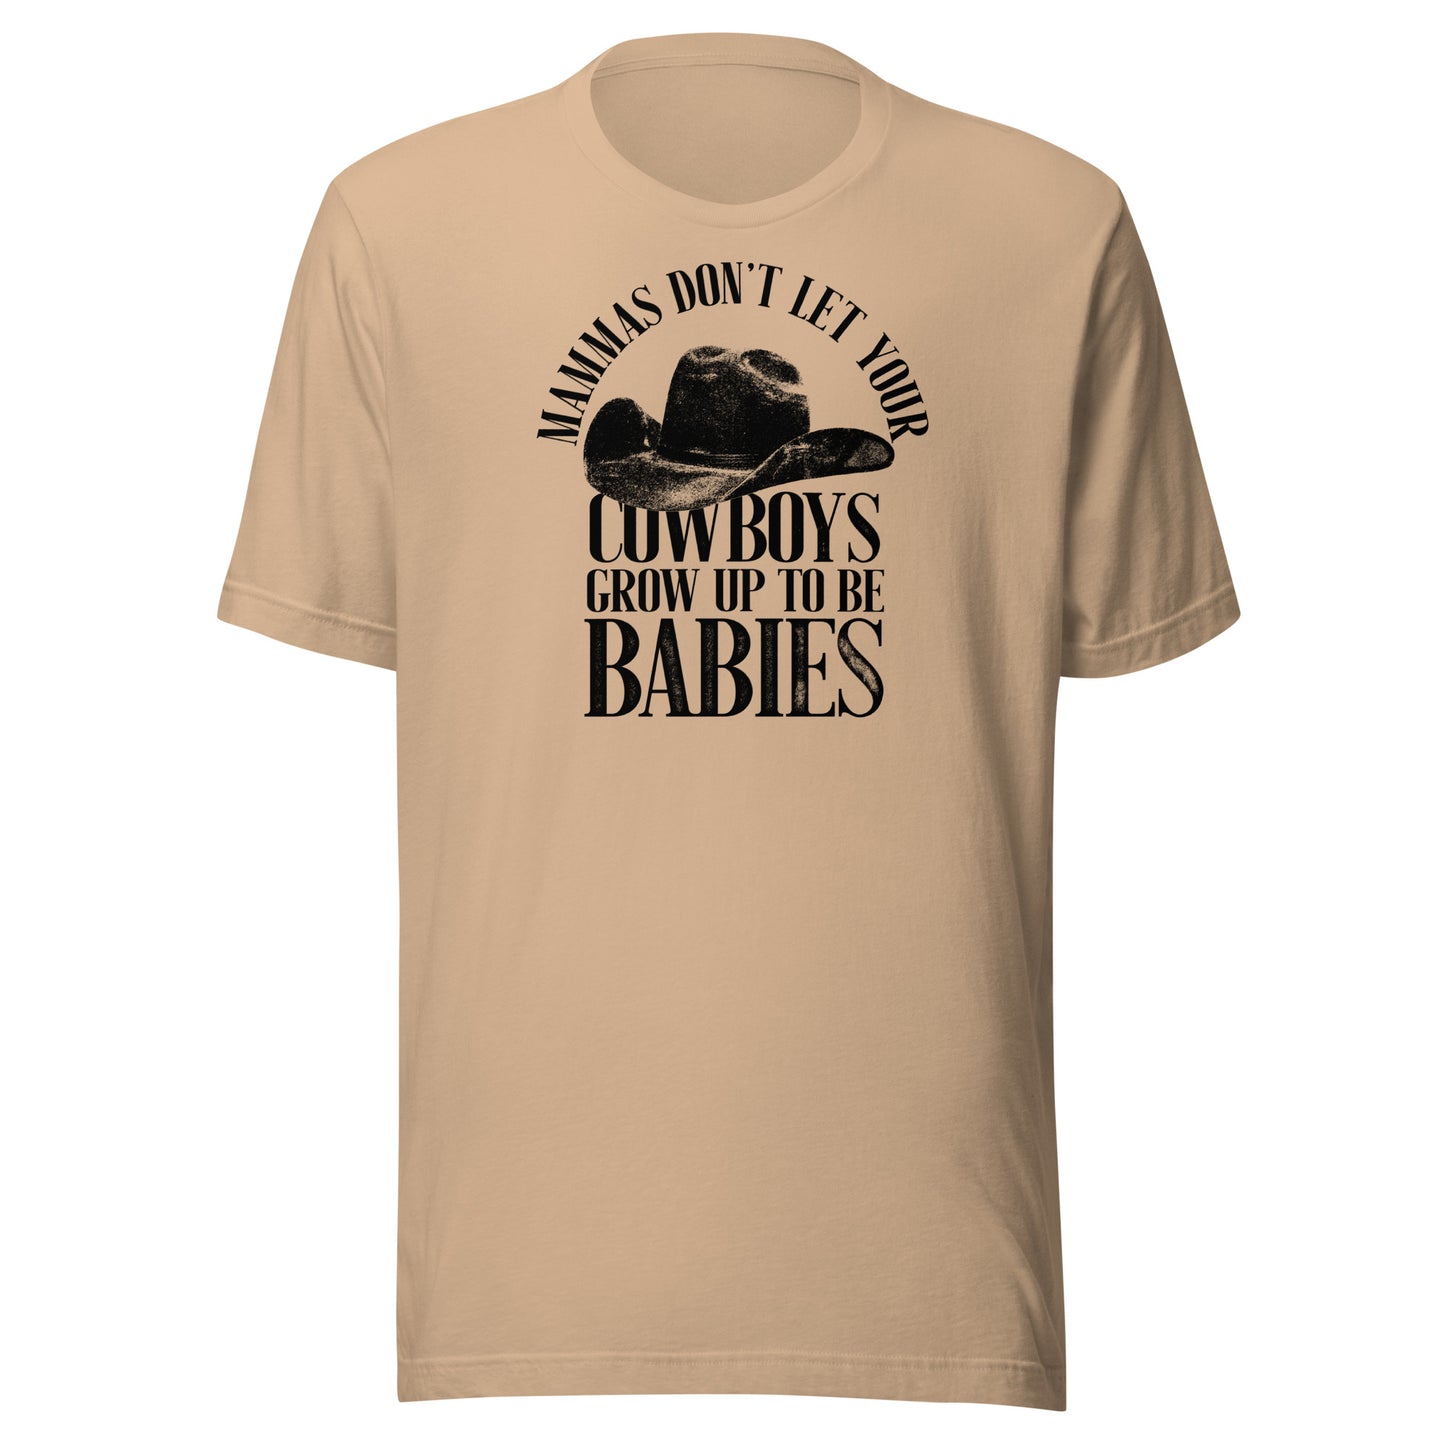 T-Shirt - Don't Let Your Cowboys Grow Up To Be Babies